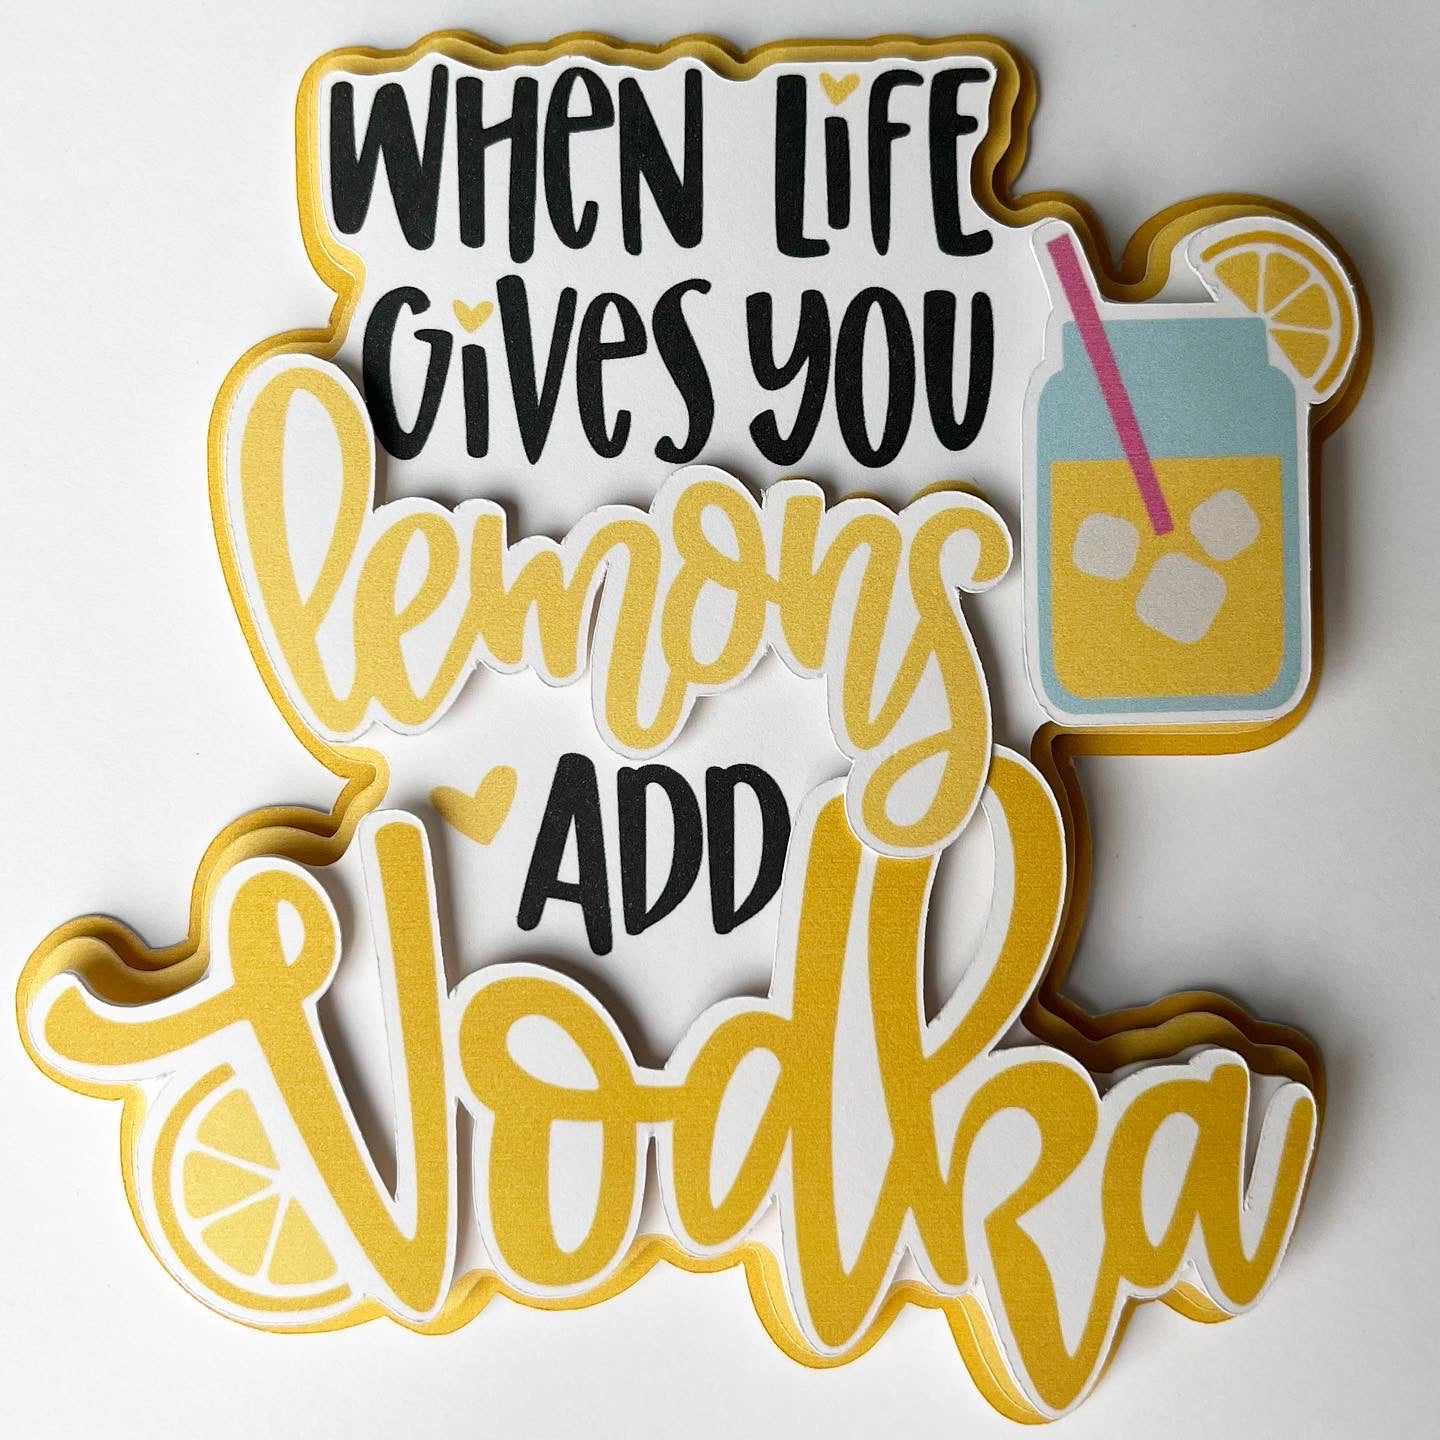 When Life Gives You Lemons Add Vodka Die Cut